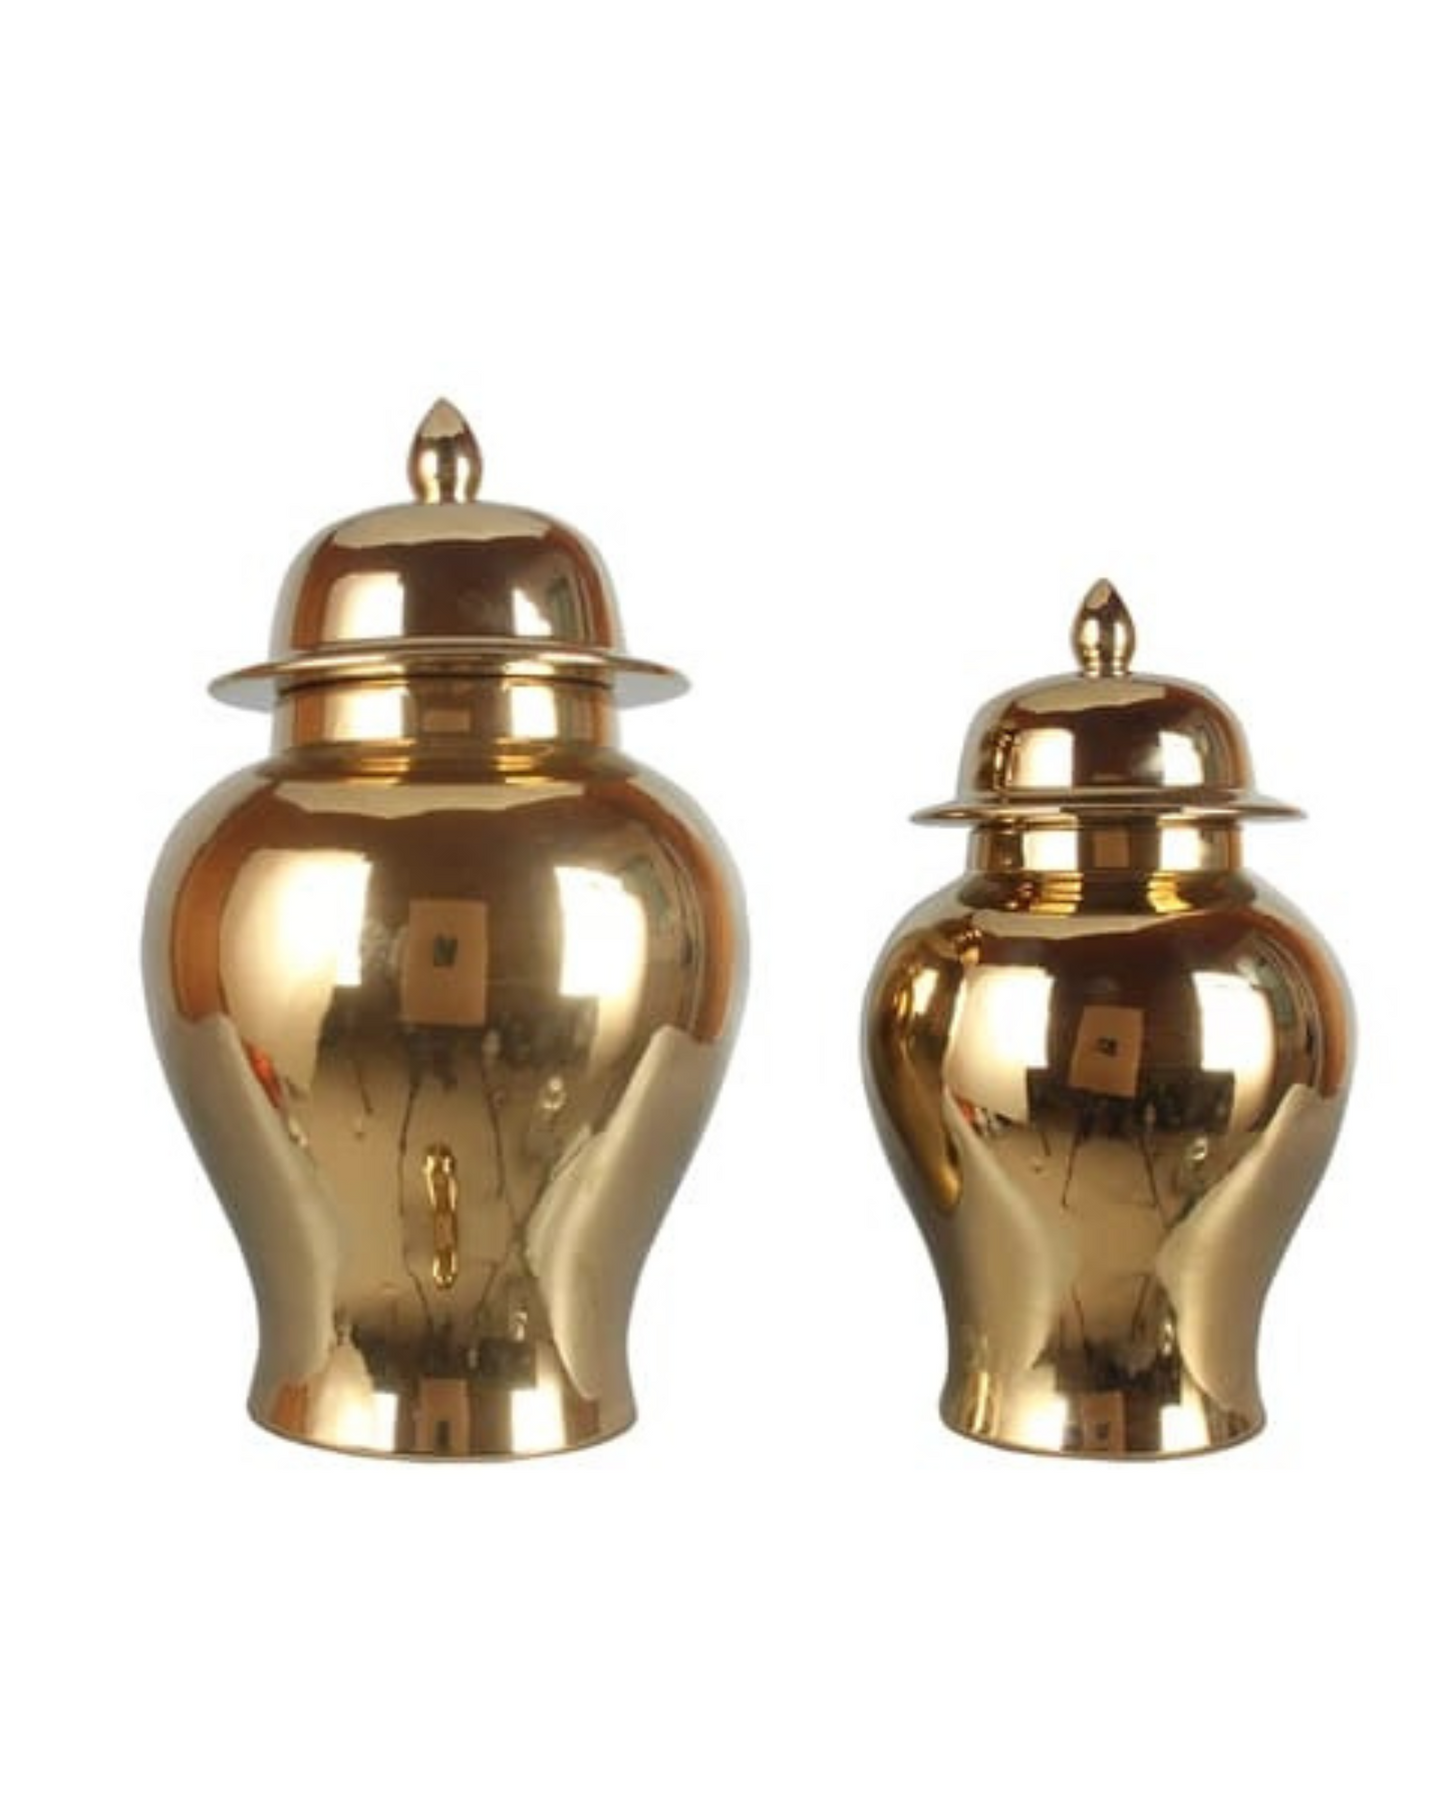 Ceramic Golden Urn - Available in 2 Sizes